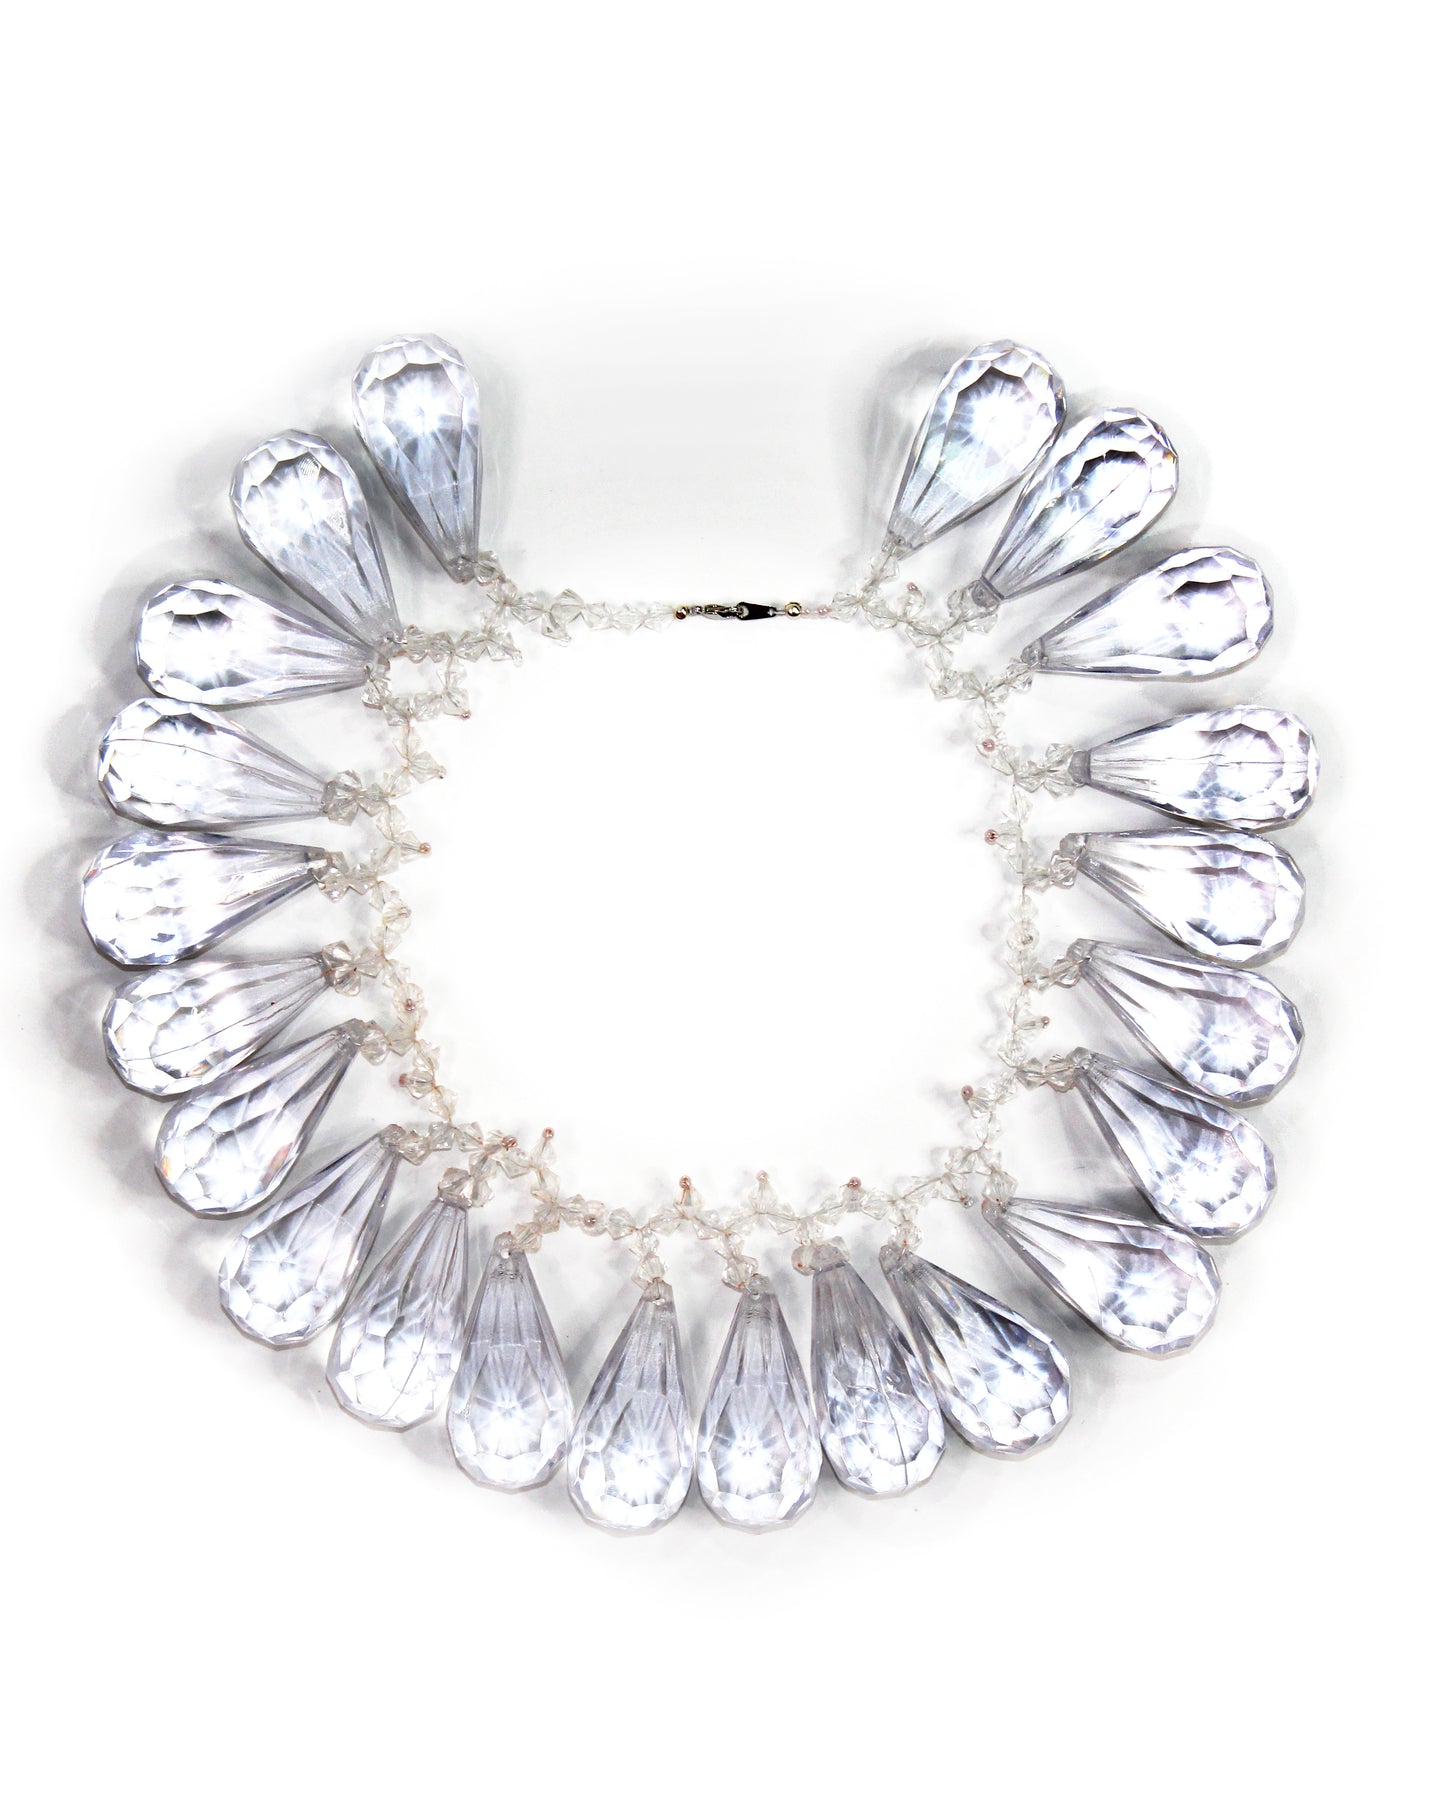 Babbling Crystal Droplet Collar Necklace